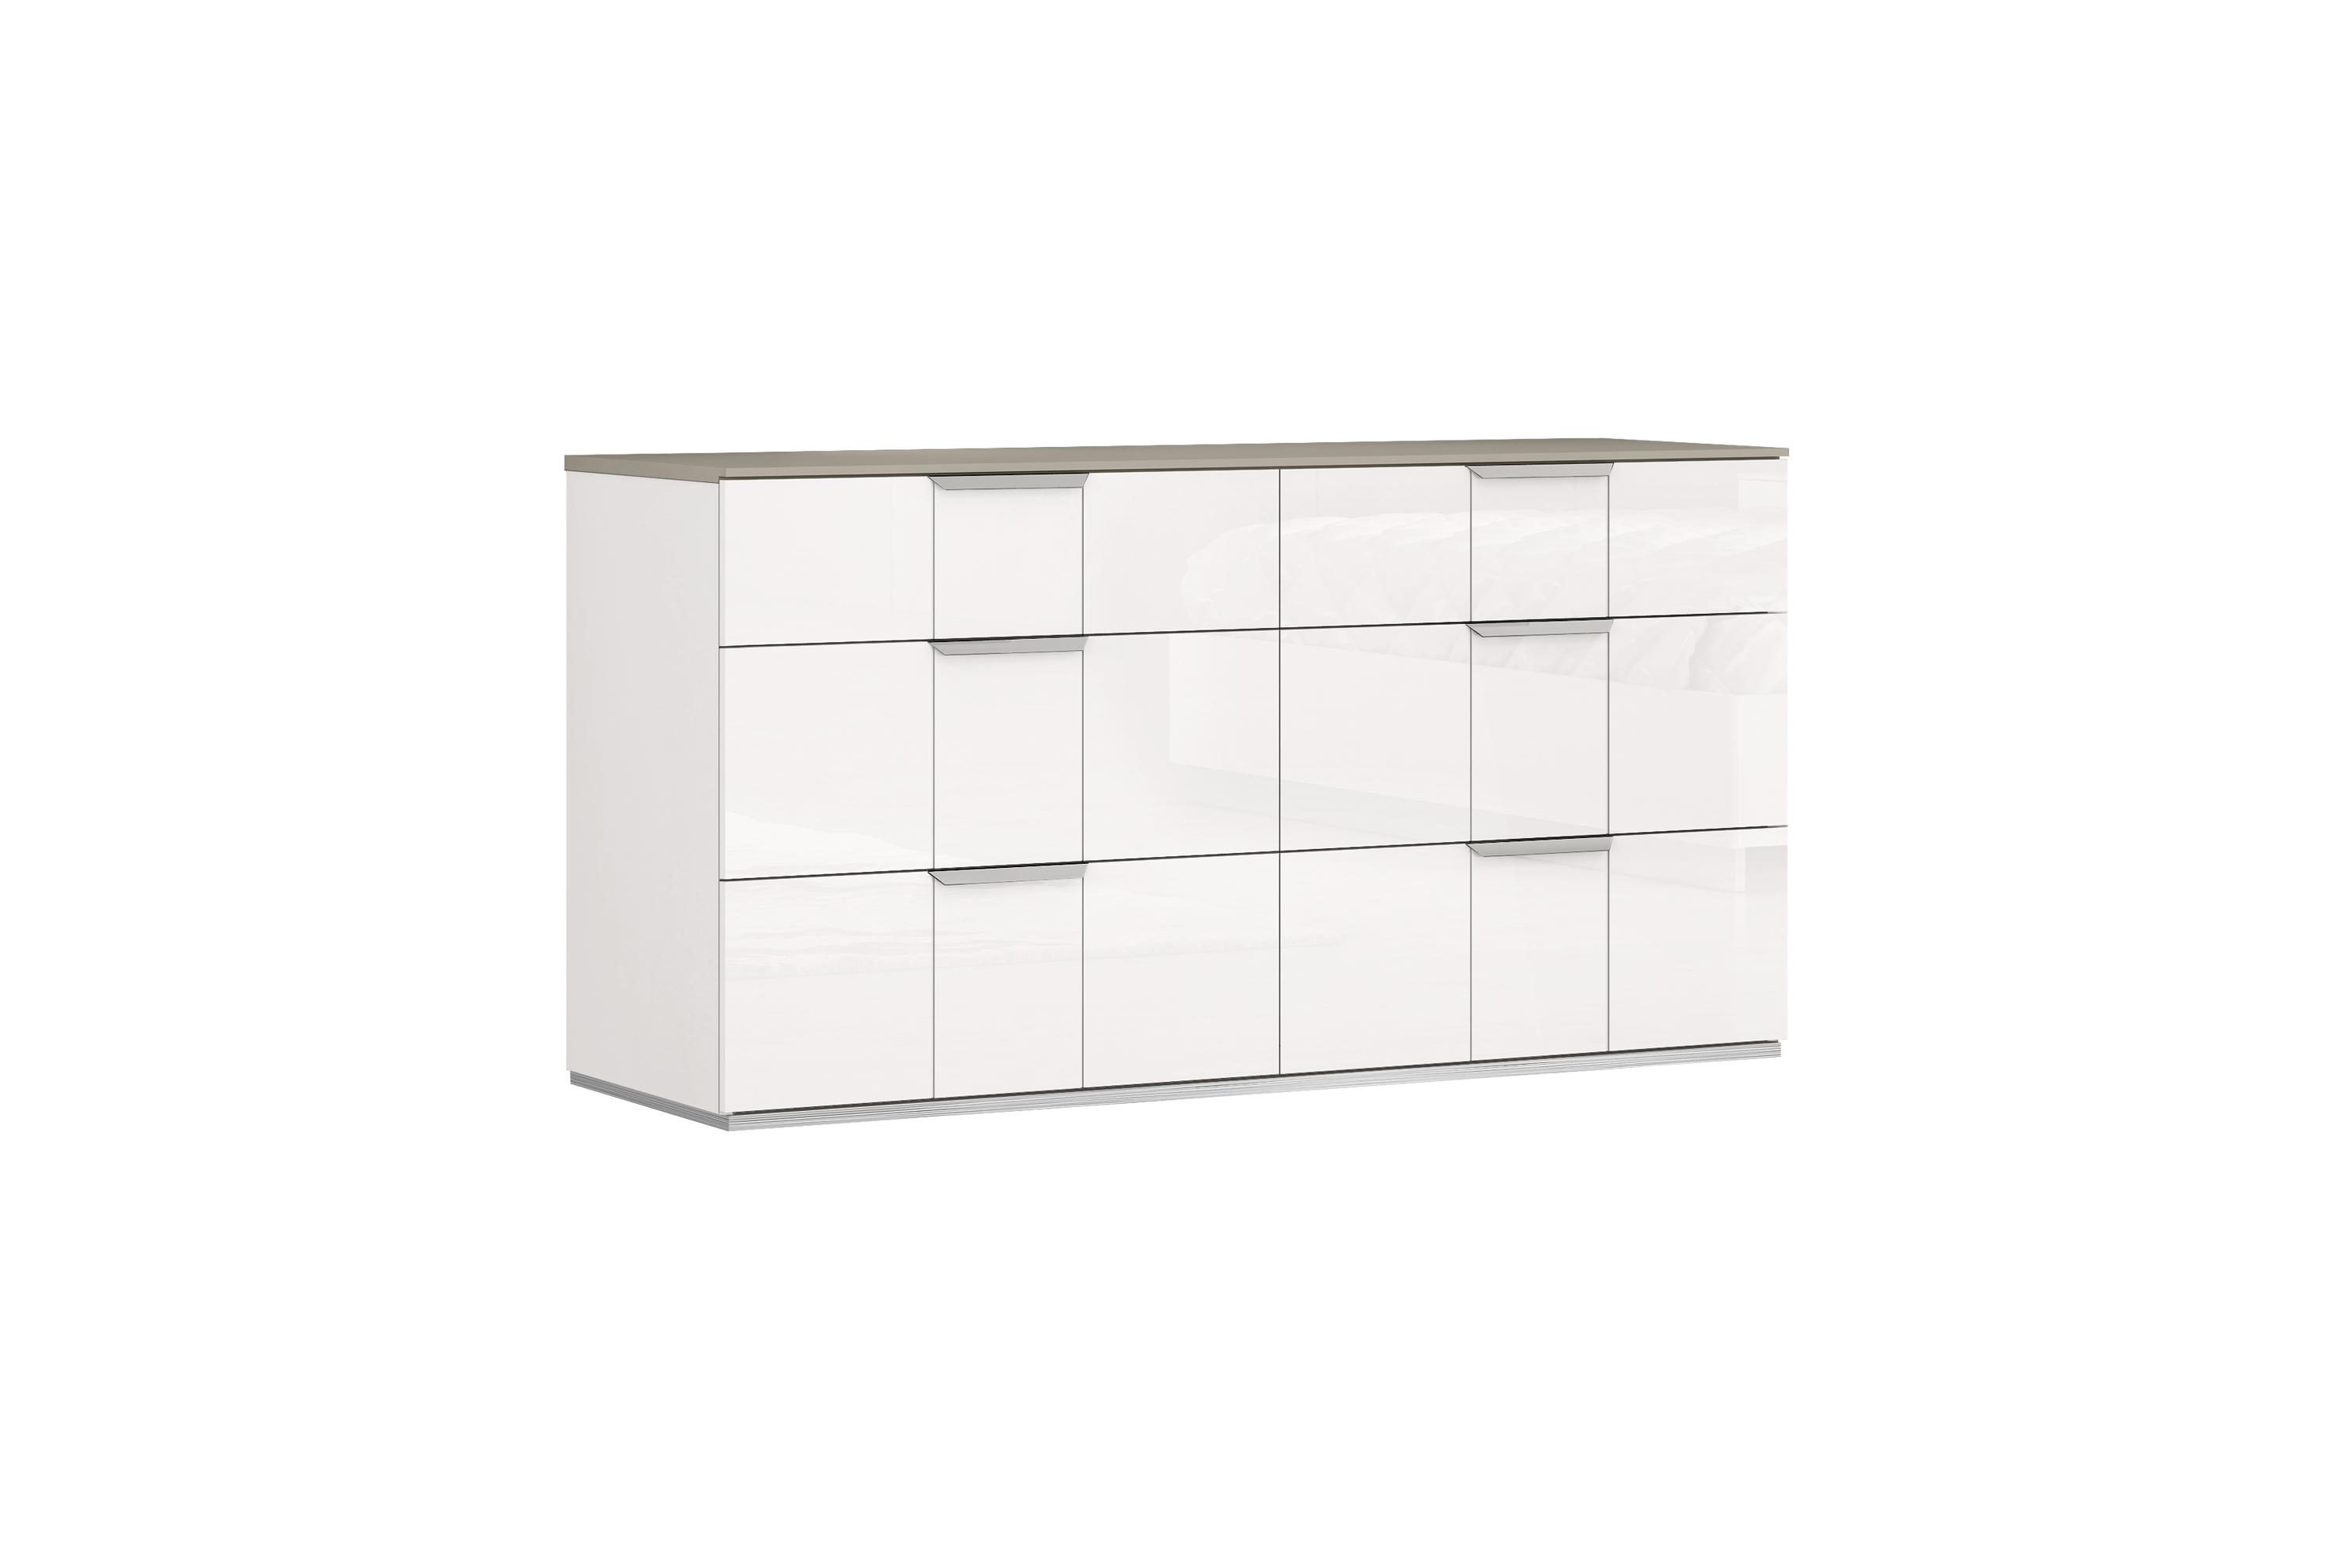 

    
Contemporary High Gloss White Solid Wood Dresser WhiteLine DR1723-WHT Daisy
